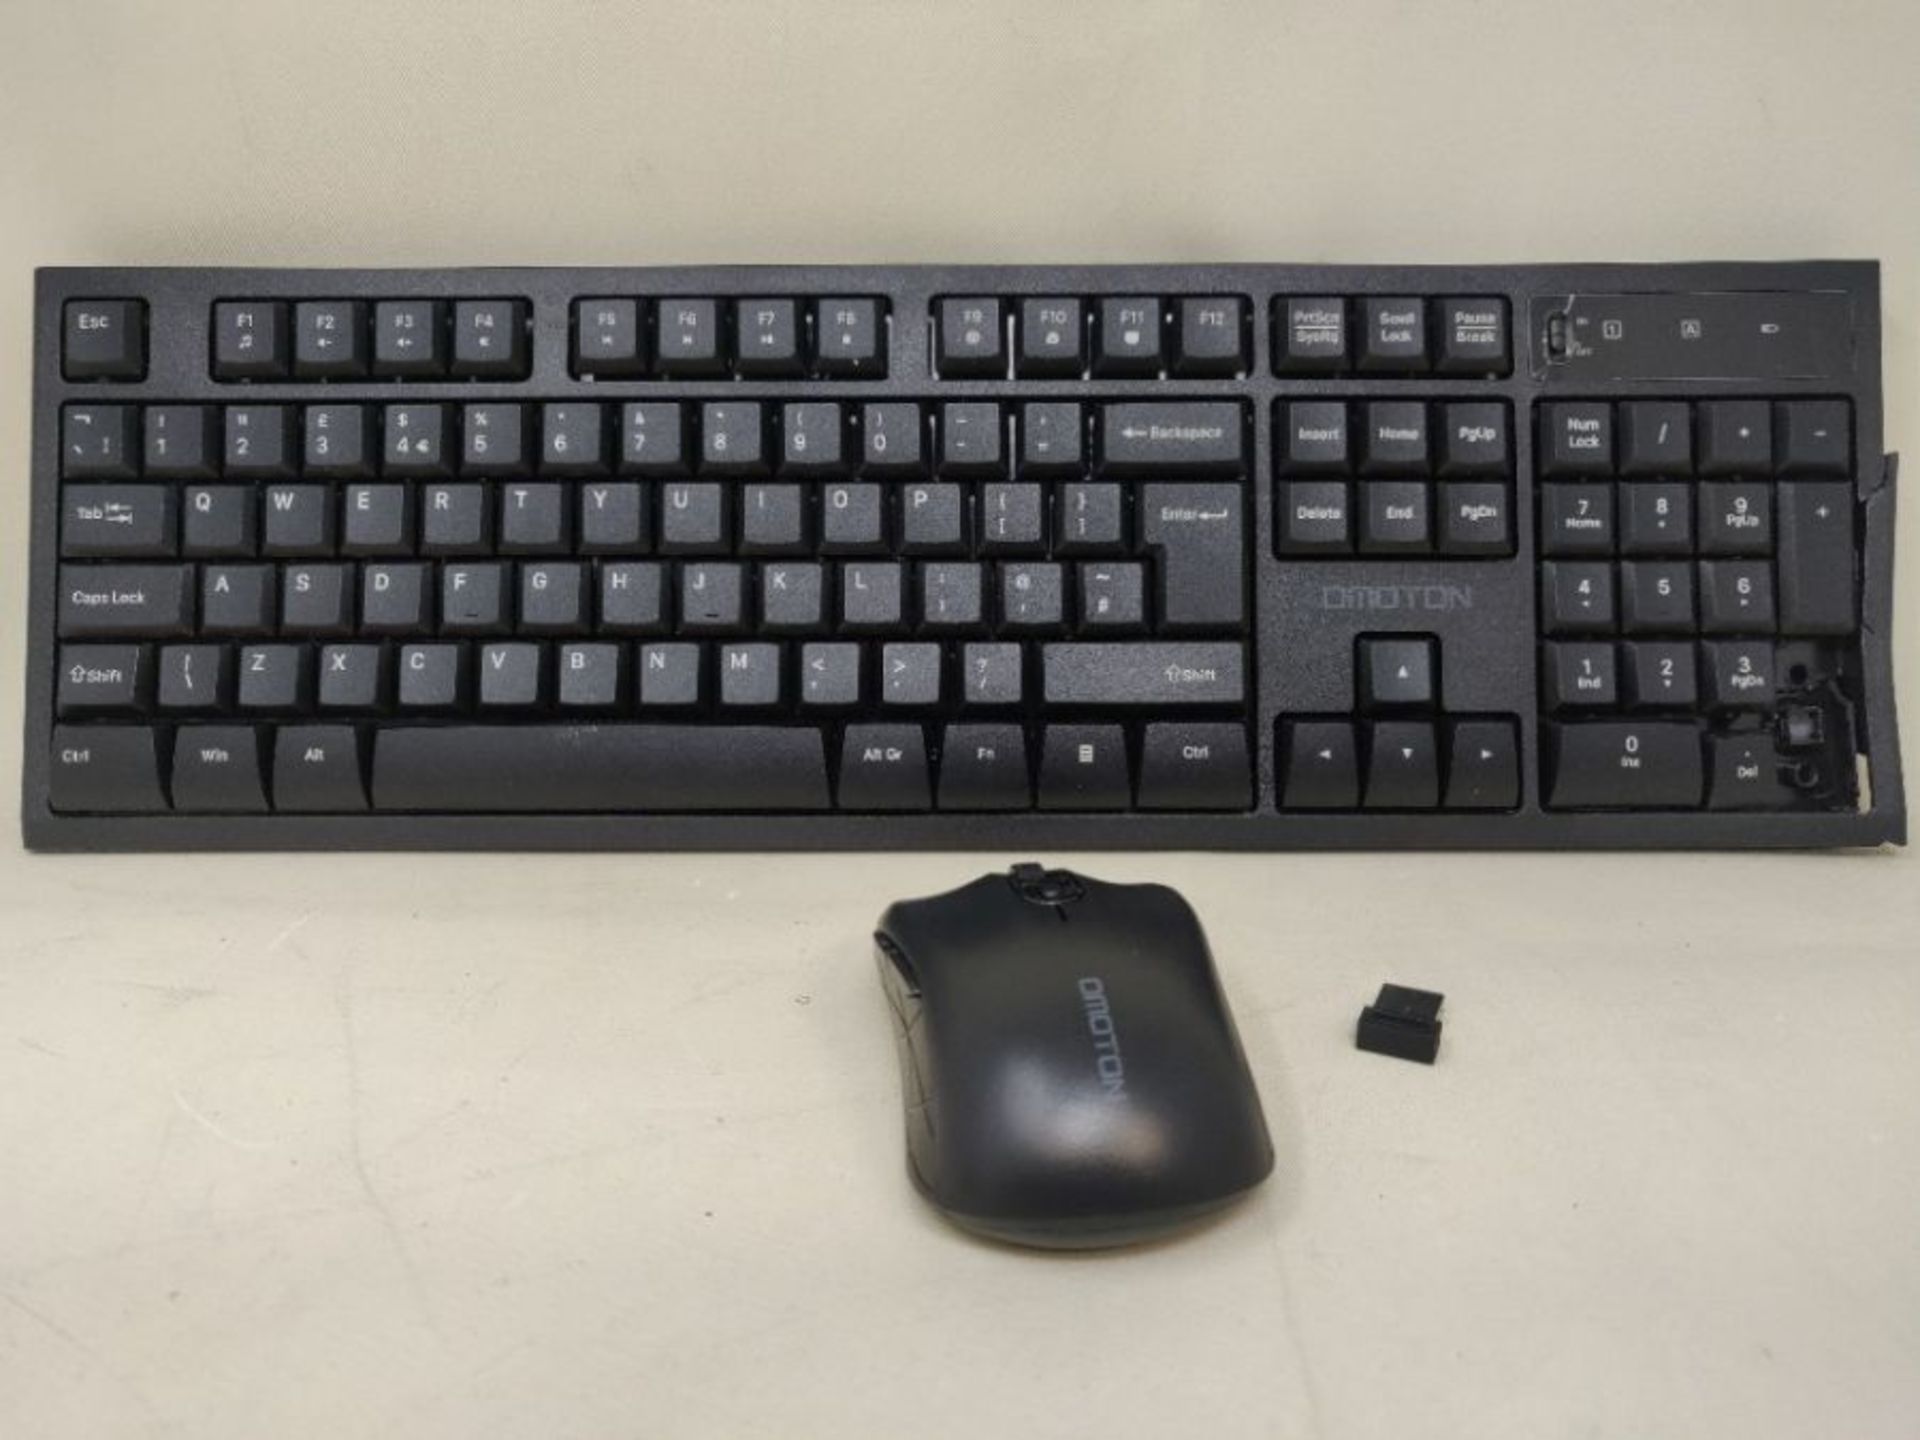 [CRACKED] Wireless Keyboard and Mouse Set, OMOTON 2.4GHz Full-Sized Wireless Keyboard - Image 2 of 2